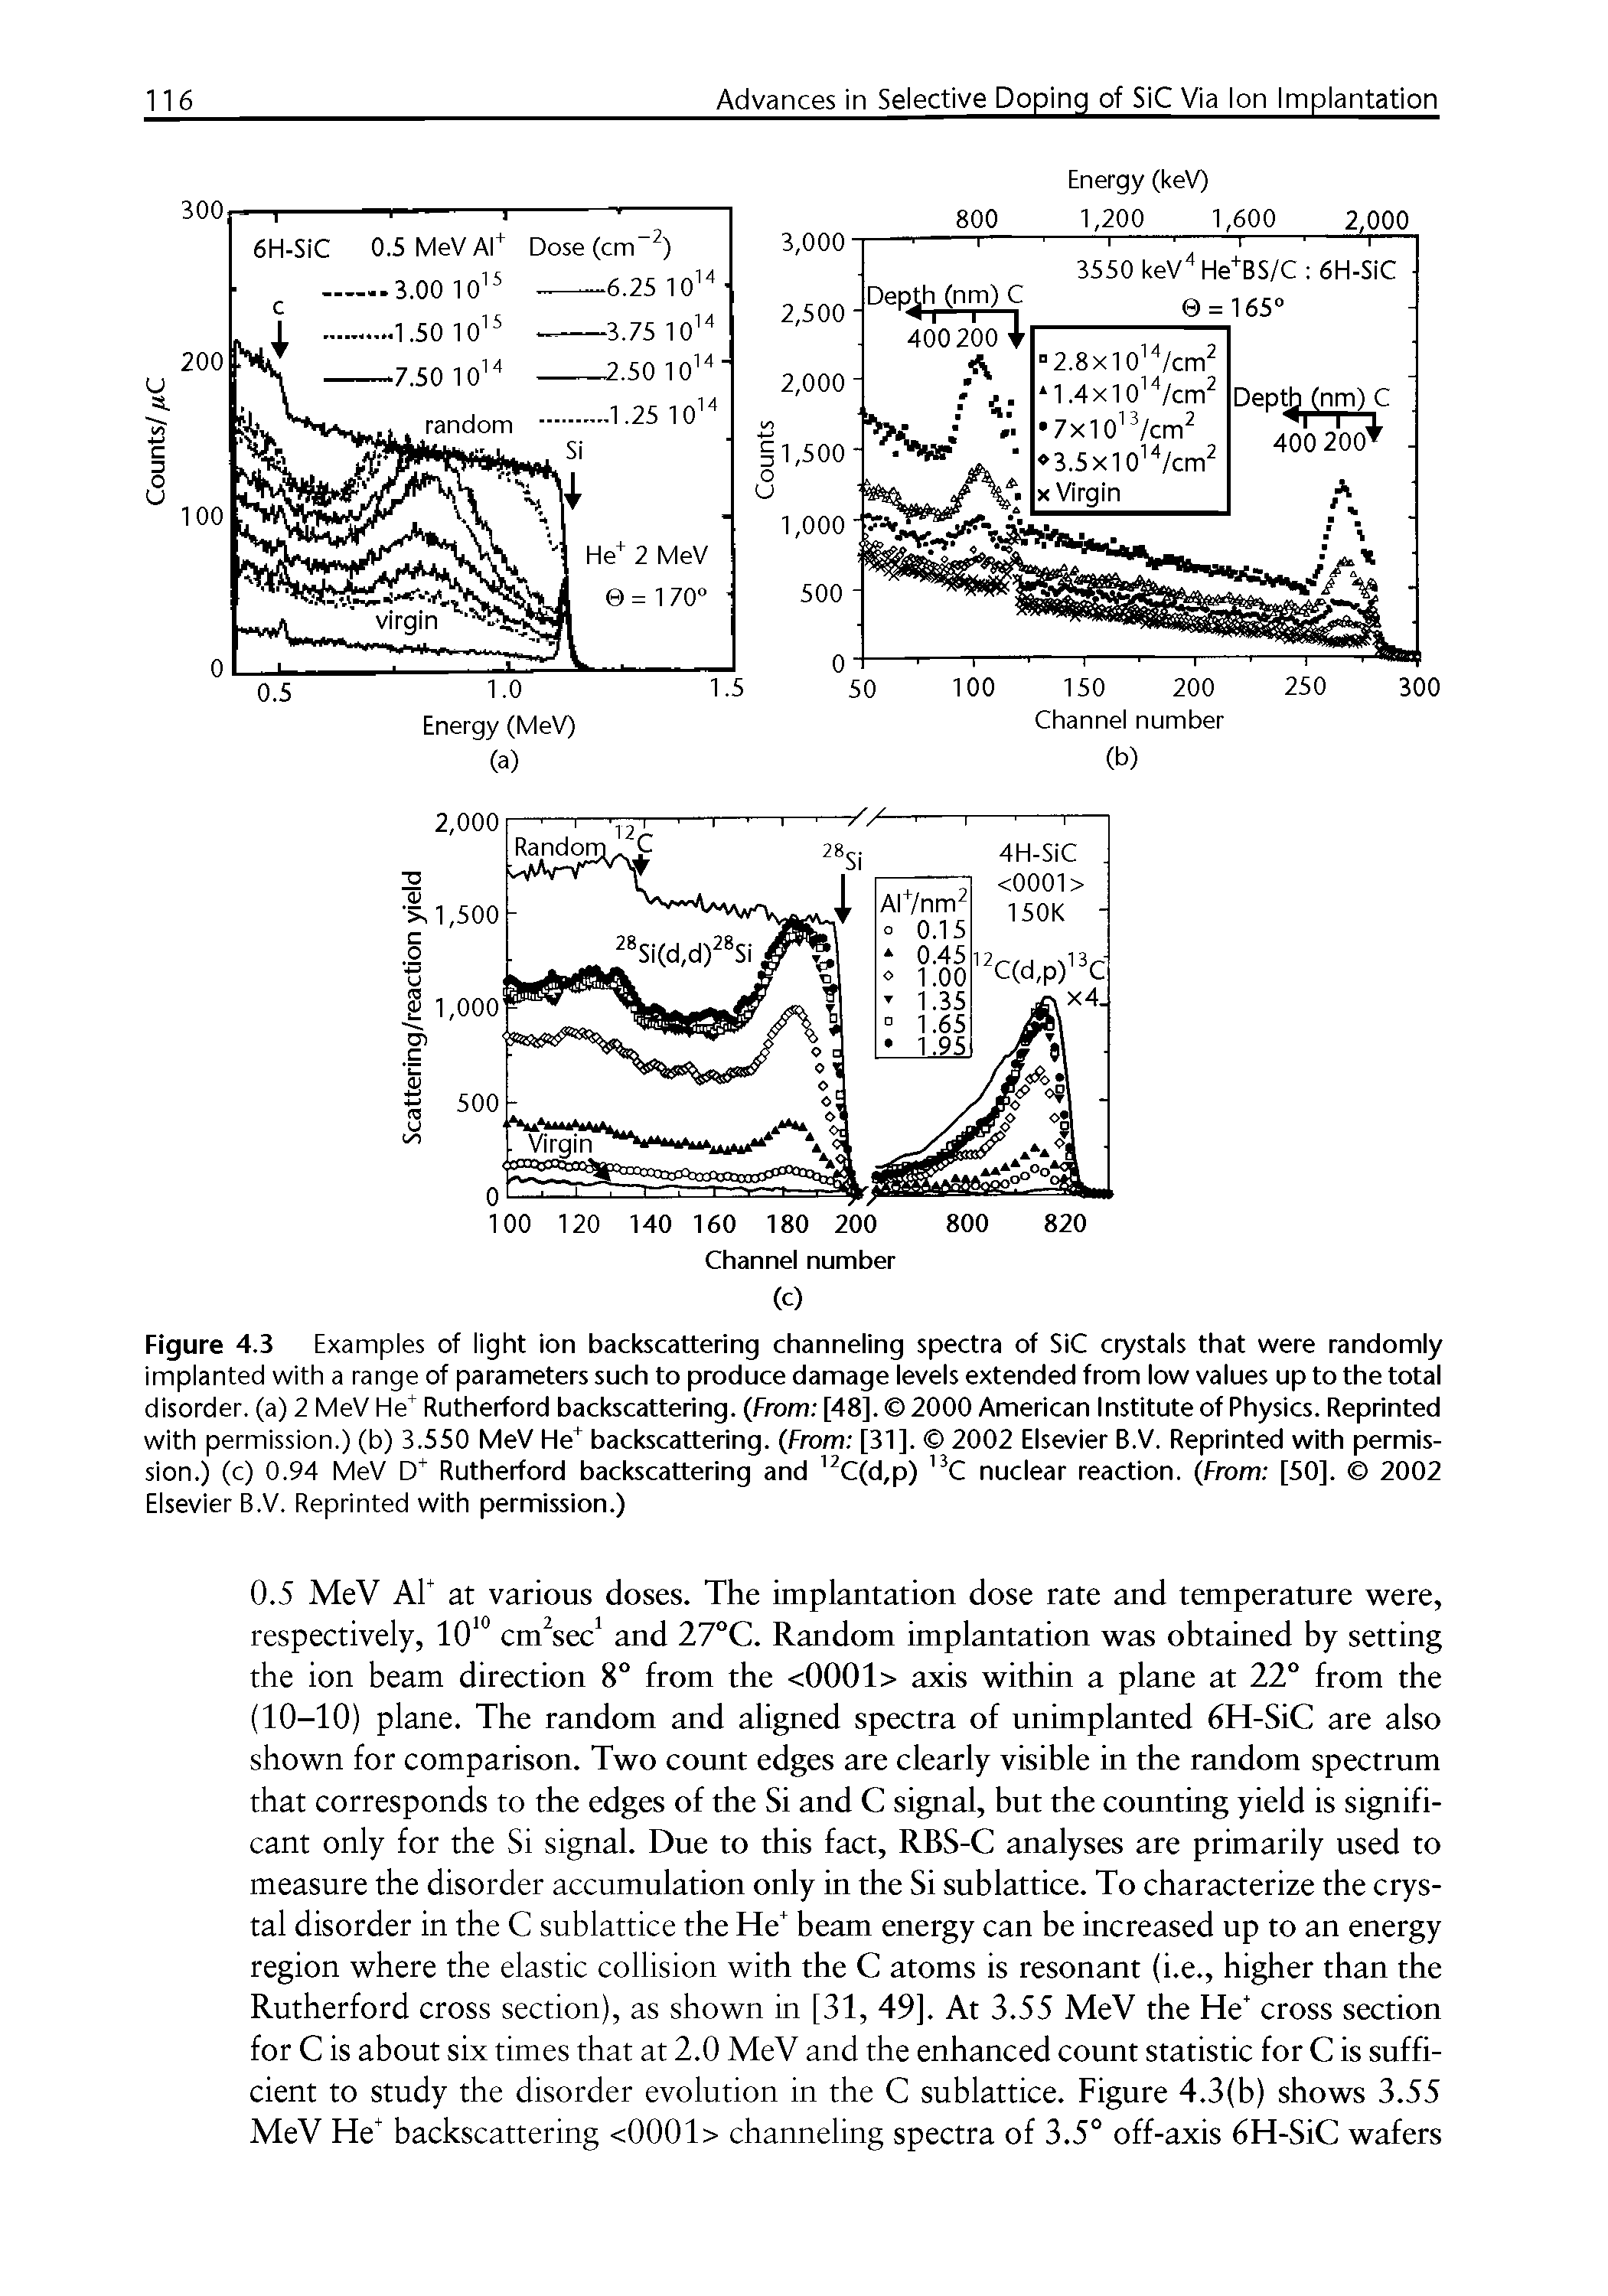 Figure 4.3 Examples of light ion backscattering channeling spectra of SiC crystals that were randomly implanted with a range of parameters such to produce damage levels extended from low values up to the total disorder, (a) 2 MeV He Rutherford backscattering. (From [48], 2000 American Institute of Physics. Reprinted with permission.) (b) 3.550 MeV He backscattering. (From [31], 2002 Elsevier B.V. Reprinted with permission.) (c) 0.94 MeV D Rutherford backscattering and C(d,p) C nuclear reaction. (From [50], 2002 Elsevier B.V. Reprinted with permission.)...